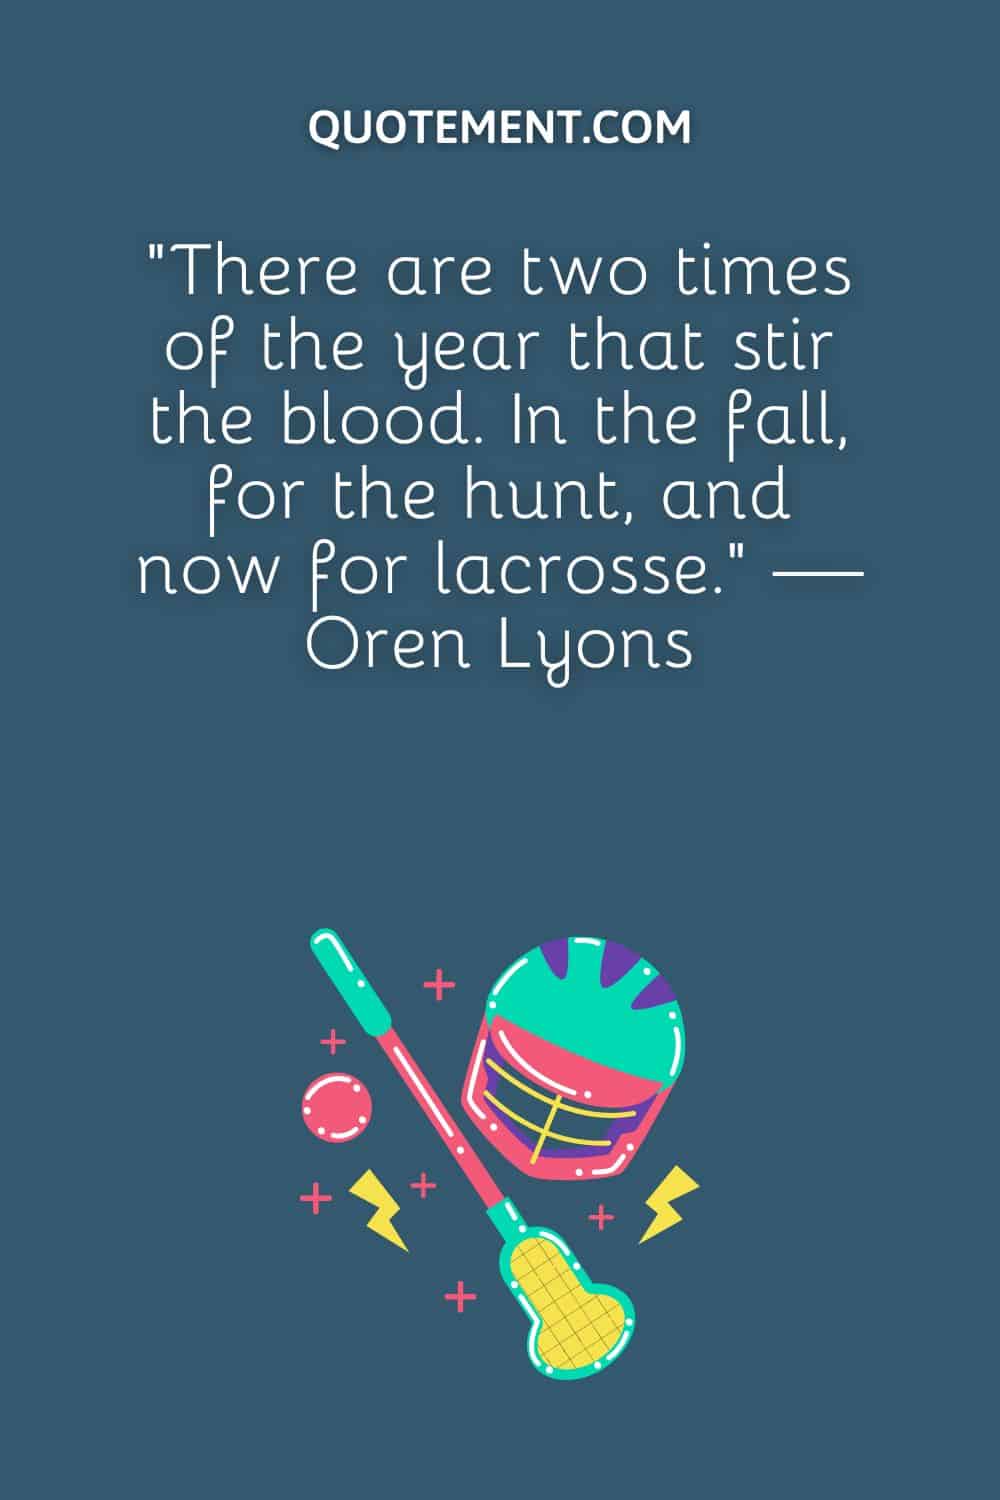 “There are two times of the year that stir the blood. In the fall, for the hunt, and now for lacrosse.” — Oren Lyons